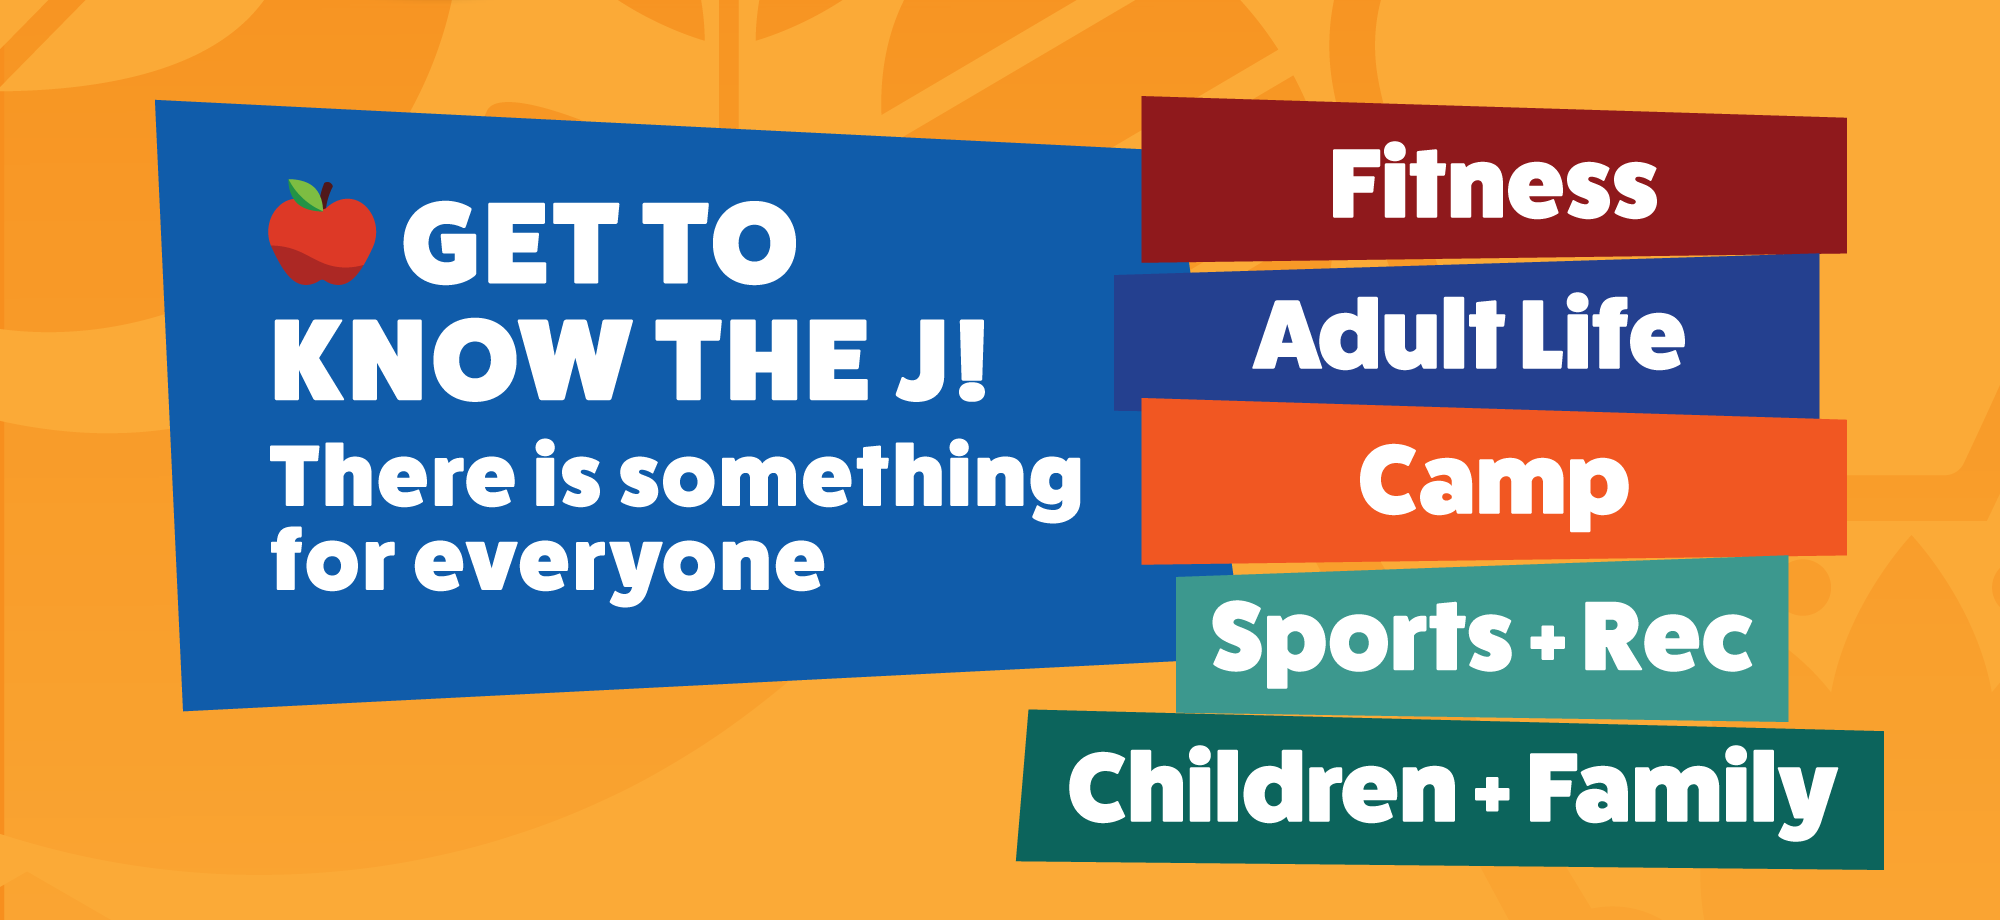 GET TO KNOW THE J! There is something for everyone | Fitness • Adult Life • Camp • Sports + Rec • Children + Family